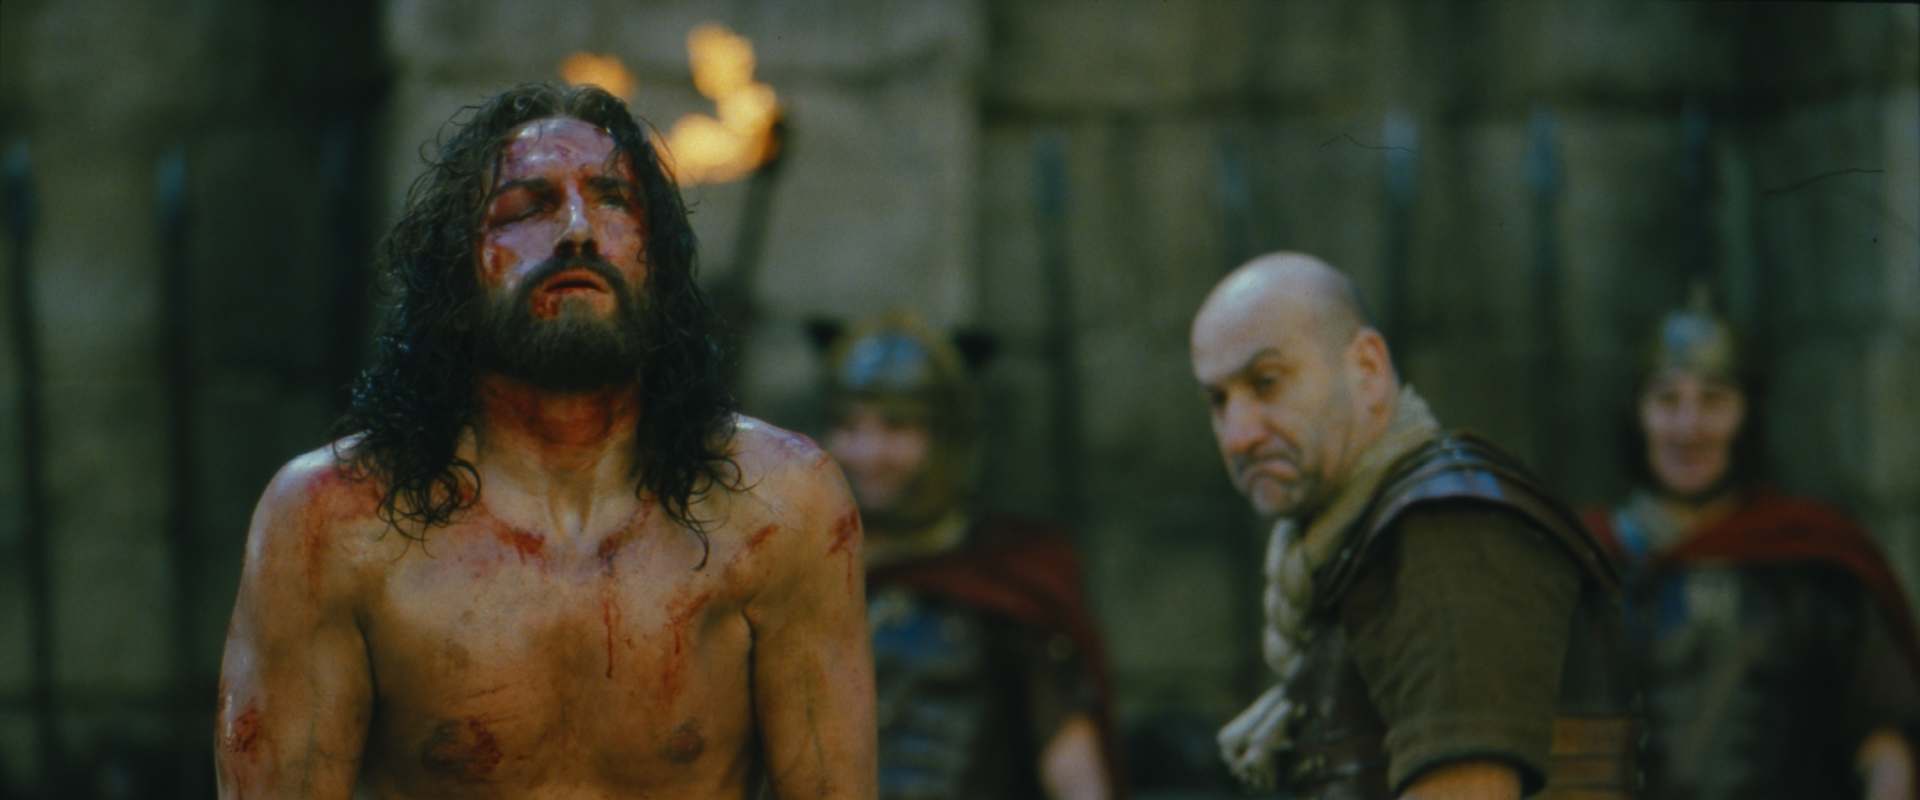 Watch The Passion Of The Christ On Netflix Today Netflixmovies Com